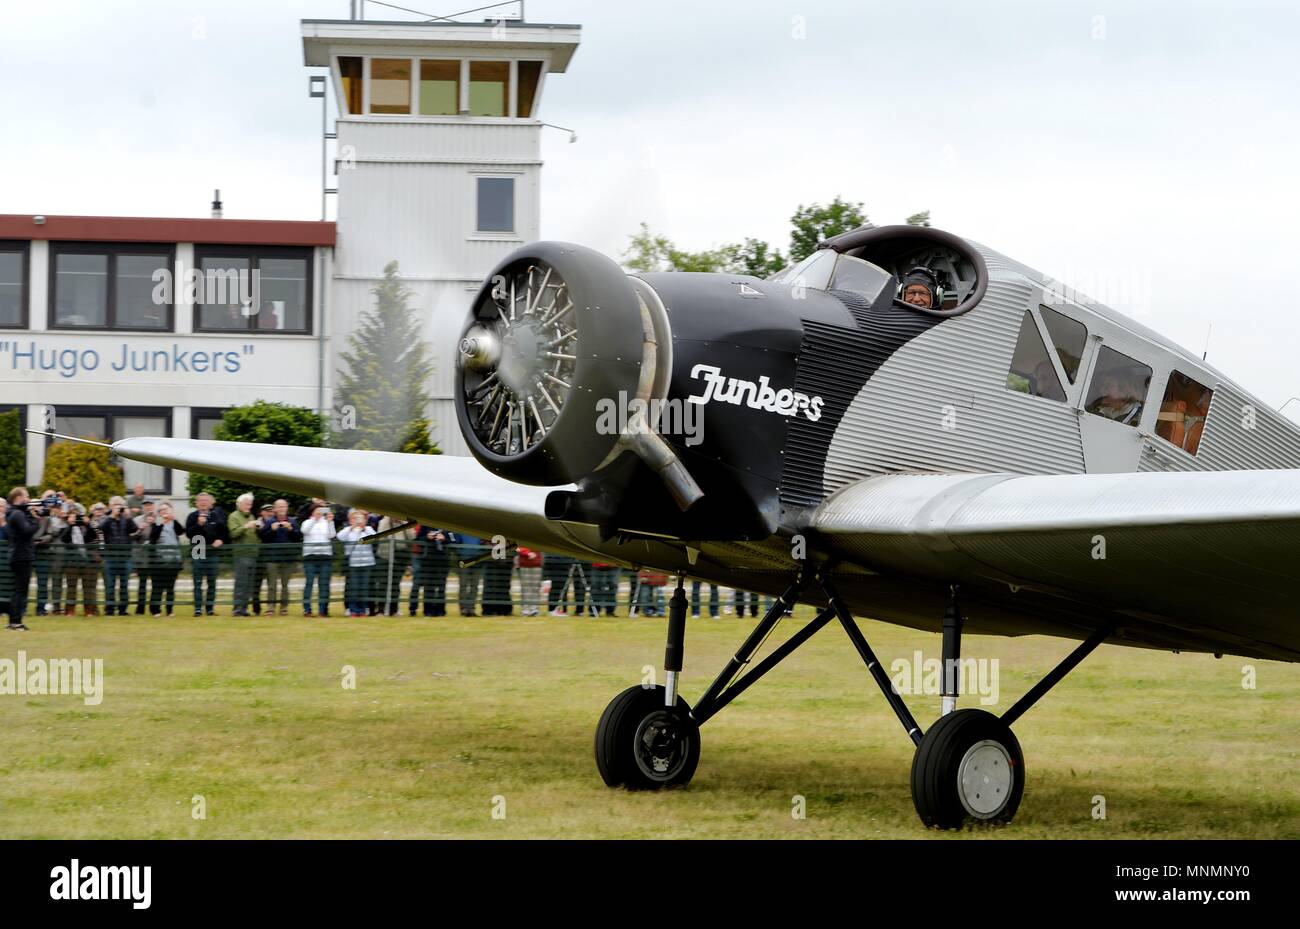 18 May 2018, Germany, Dessau-Rosslau: A replica of a Junkers F 13 pictured at the airfield during the 13th Hugo Junkers Festival. The replica of one of Prof. Hugo Junkers' most famous creations is the only airworthy example of its kind. It was faithfully built over more than 10 years using original construction plans and laser measurements of museum planes. Photo: Frank May/dpa/ZB Stock Photo